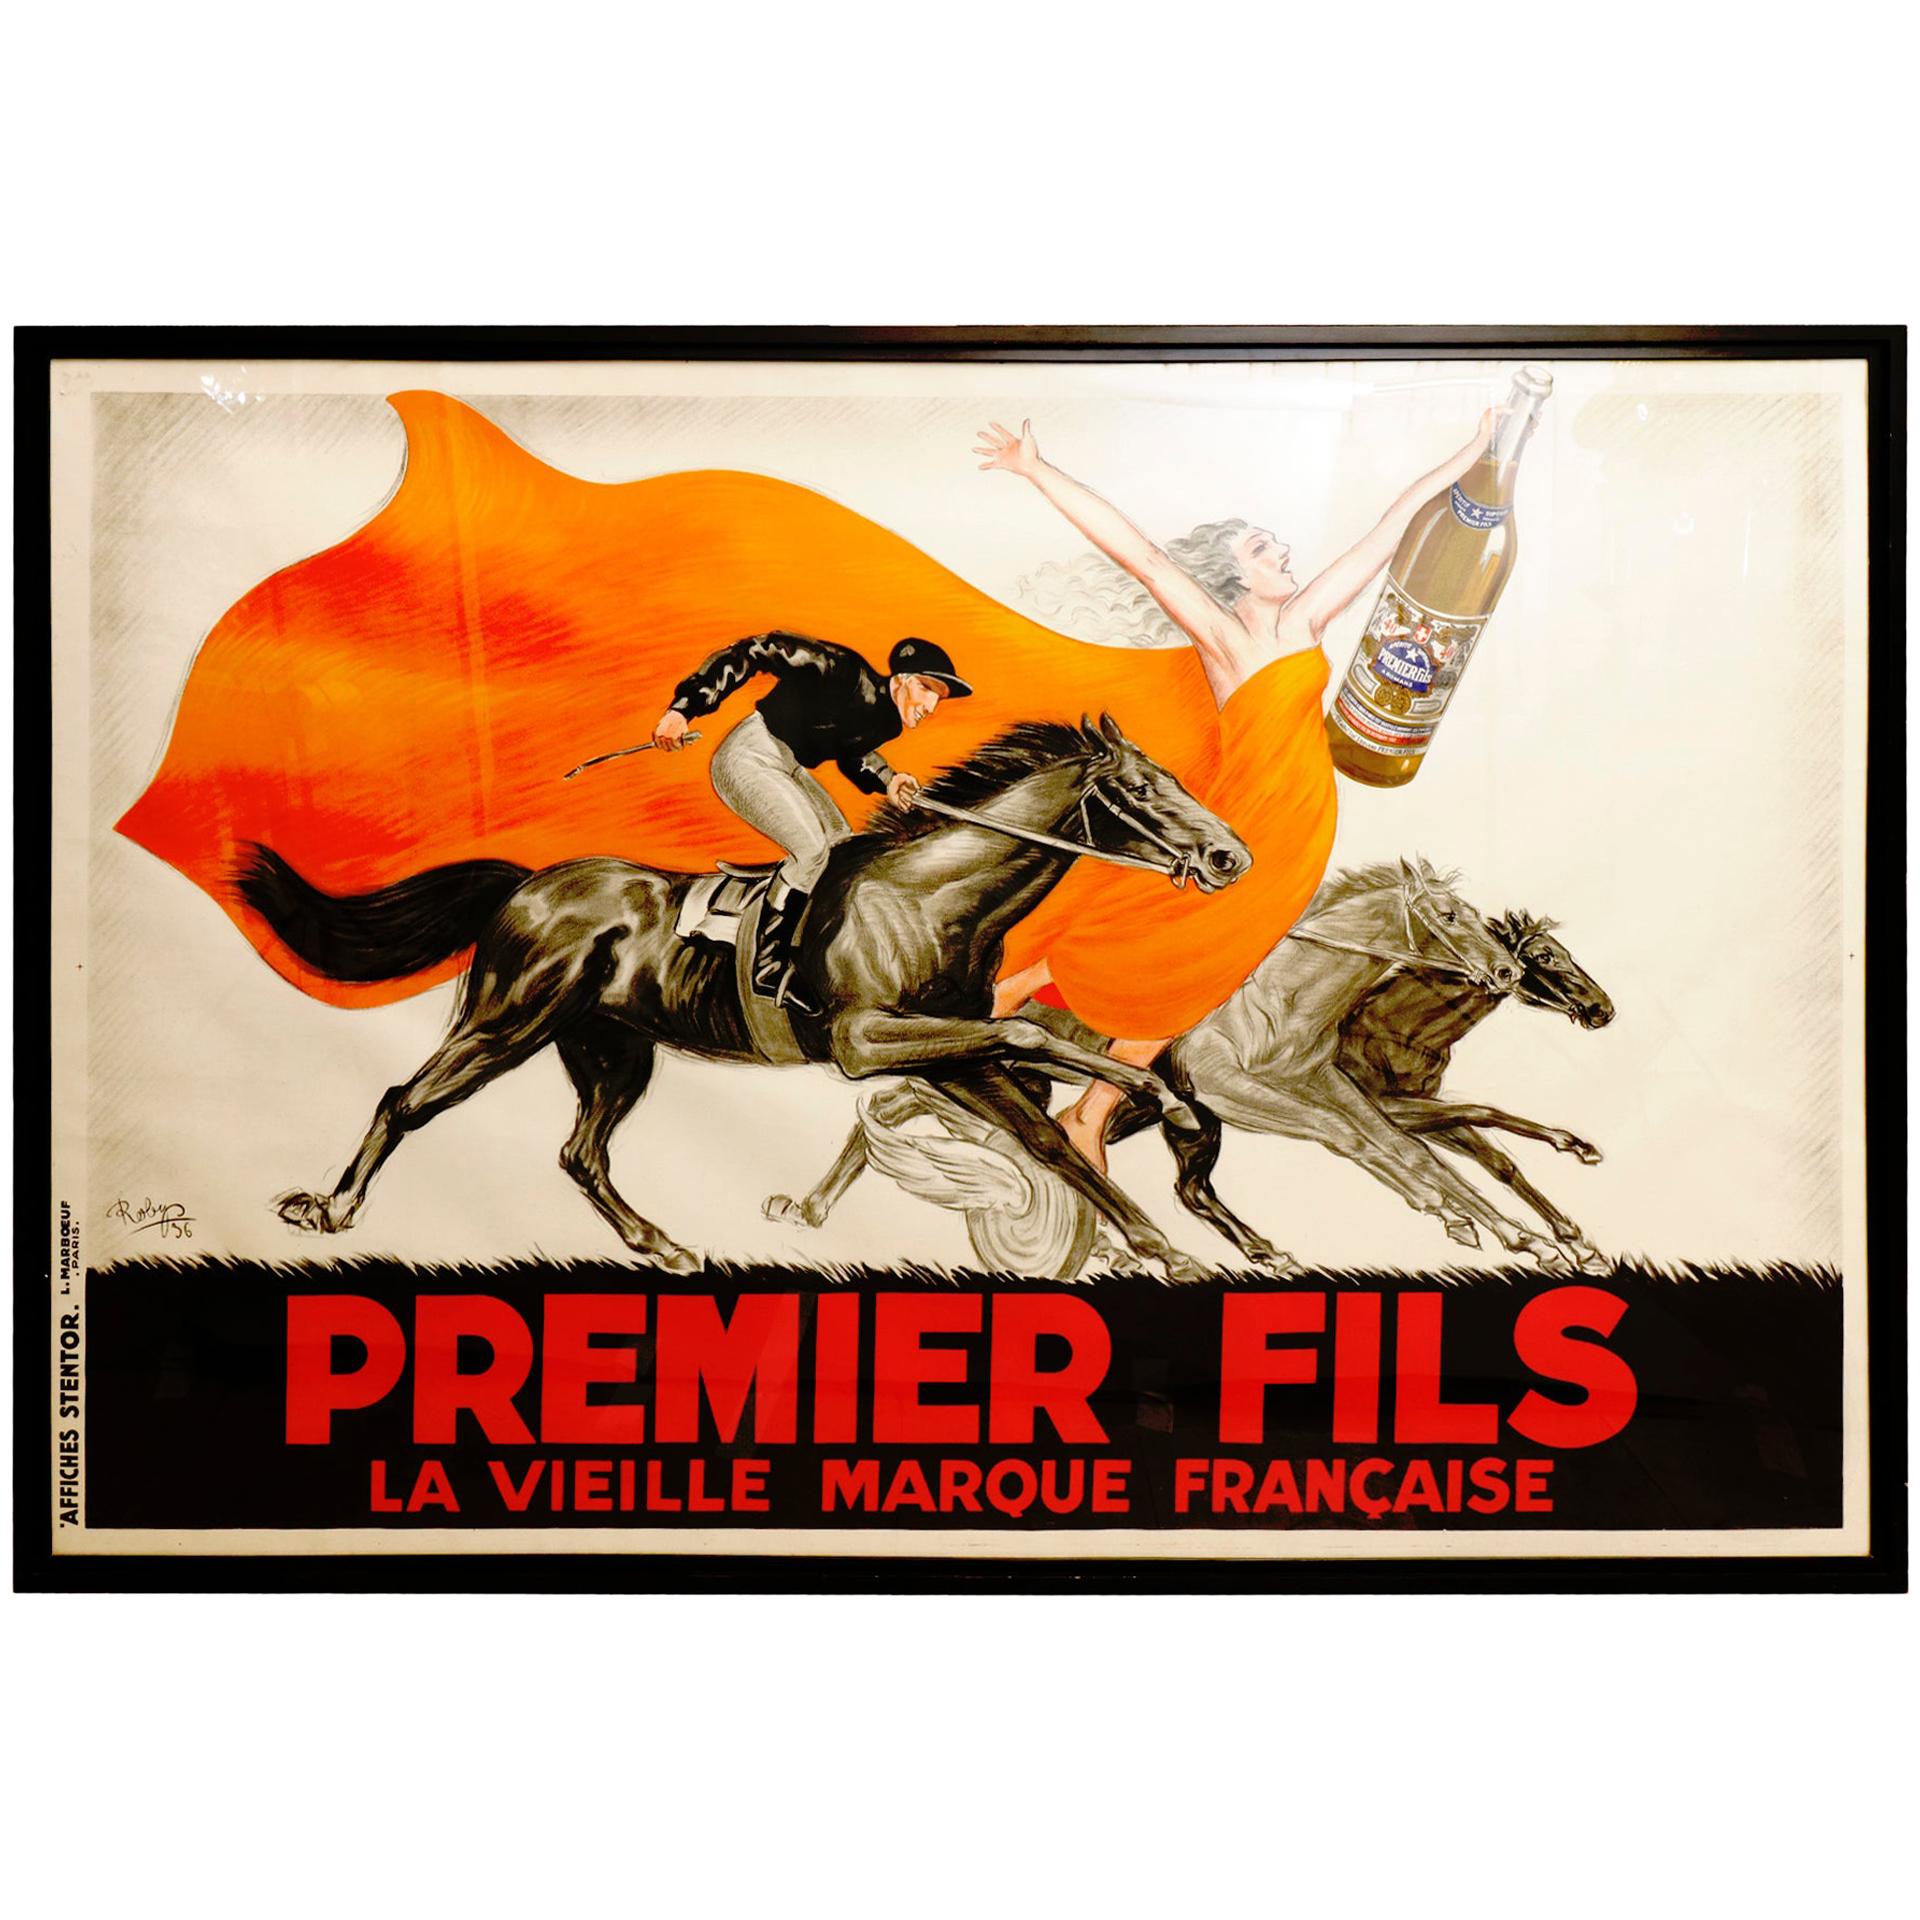 Rare 1936 Poster by Robys: "Premier Fils" Aperitif: Large Format